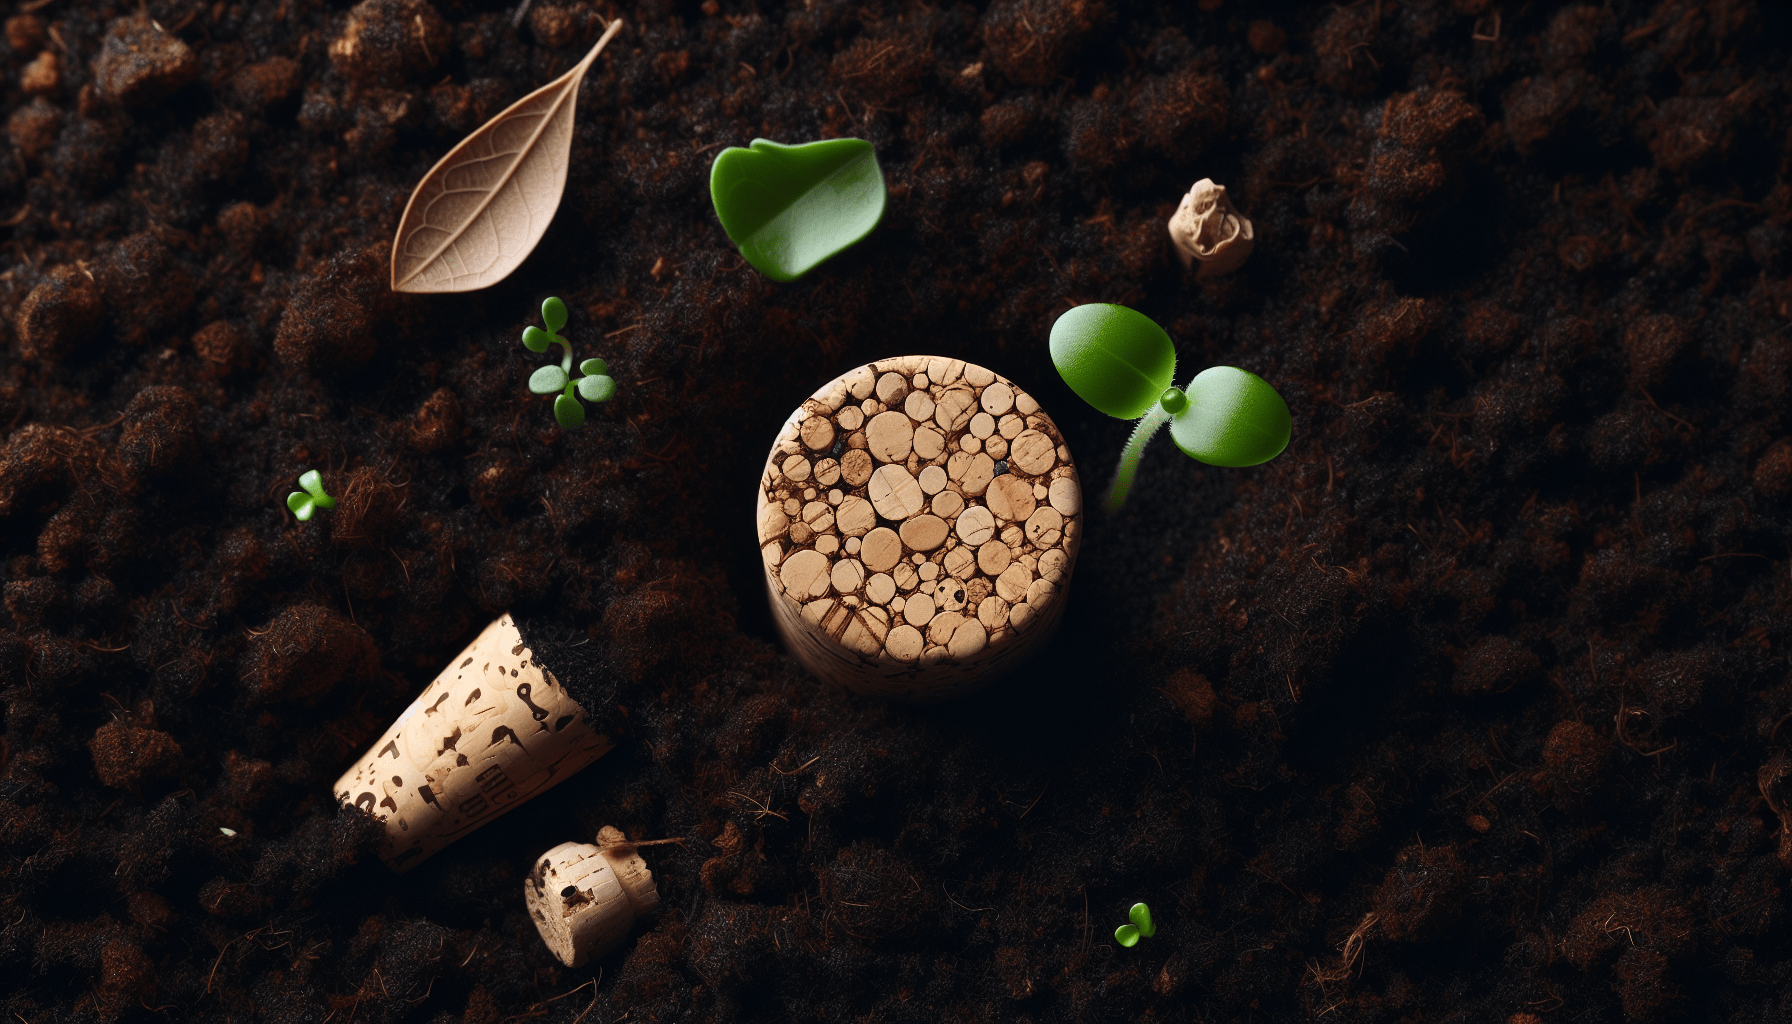 can i compost wine corks